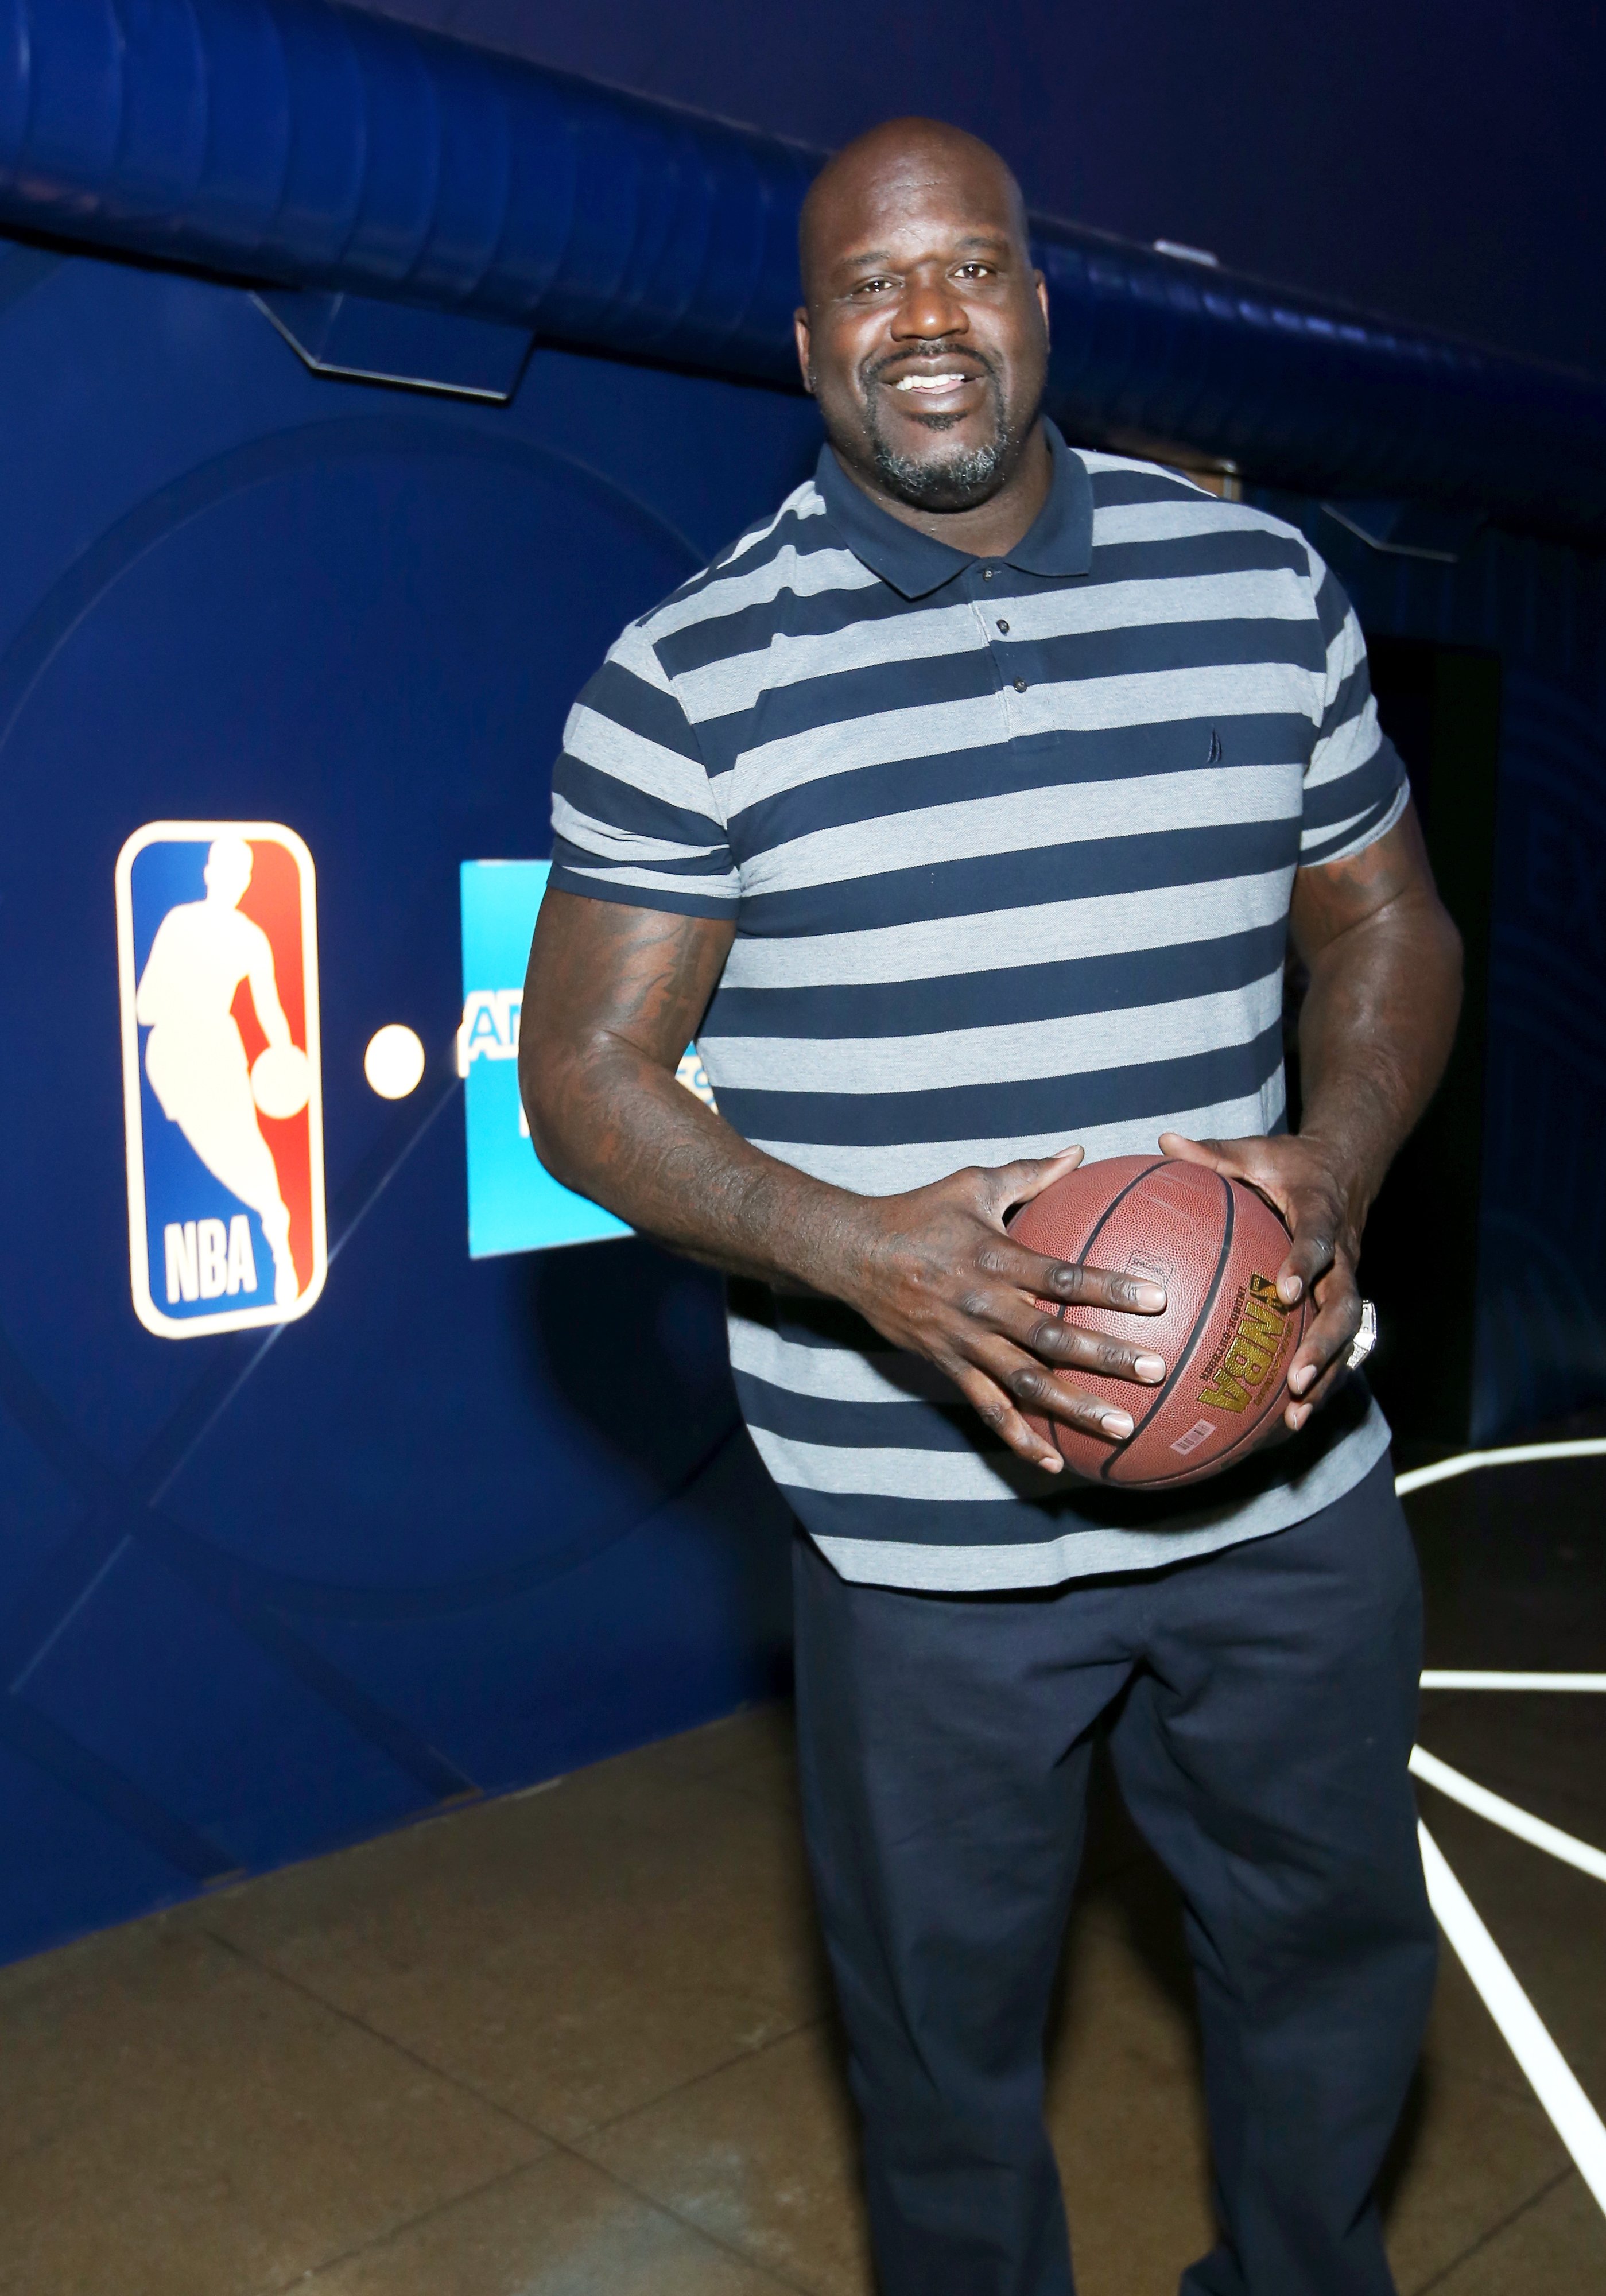 Retired NBA star Shaquille O'Neal. | Photo: Getty Images